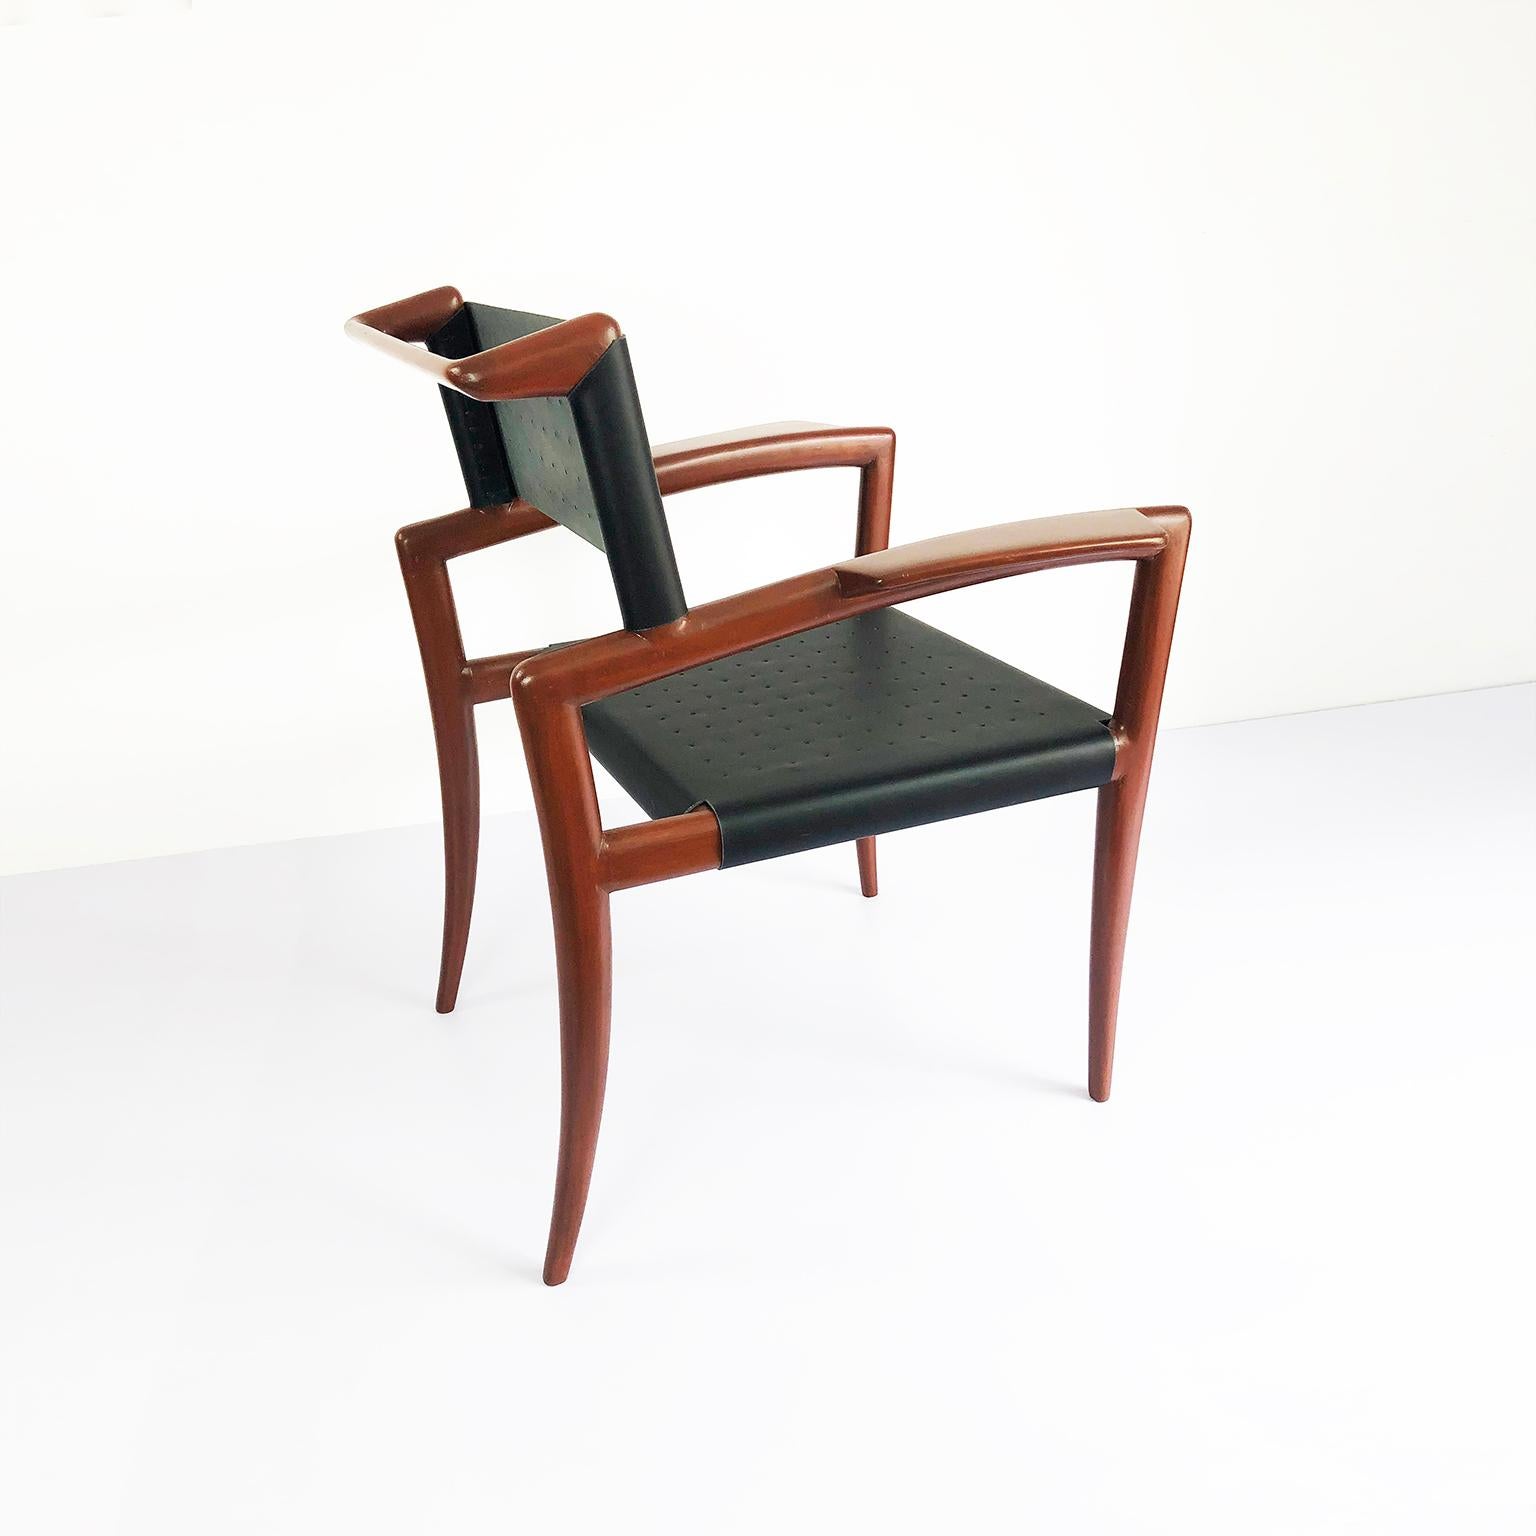 Mexican Extremely Hard to Find Pair of Klismos Chairs by Charles Allen